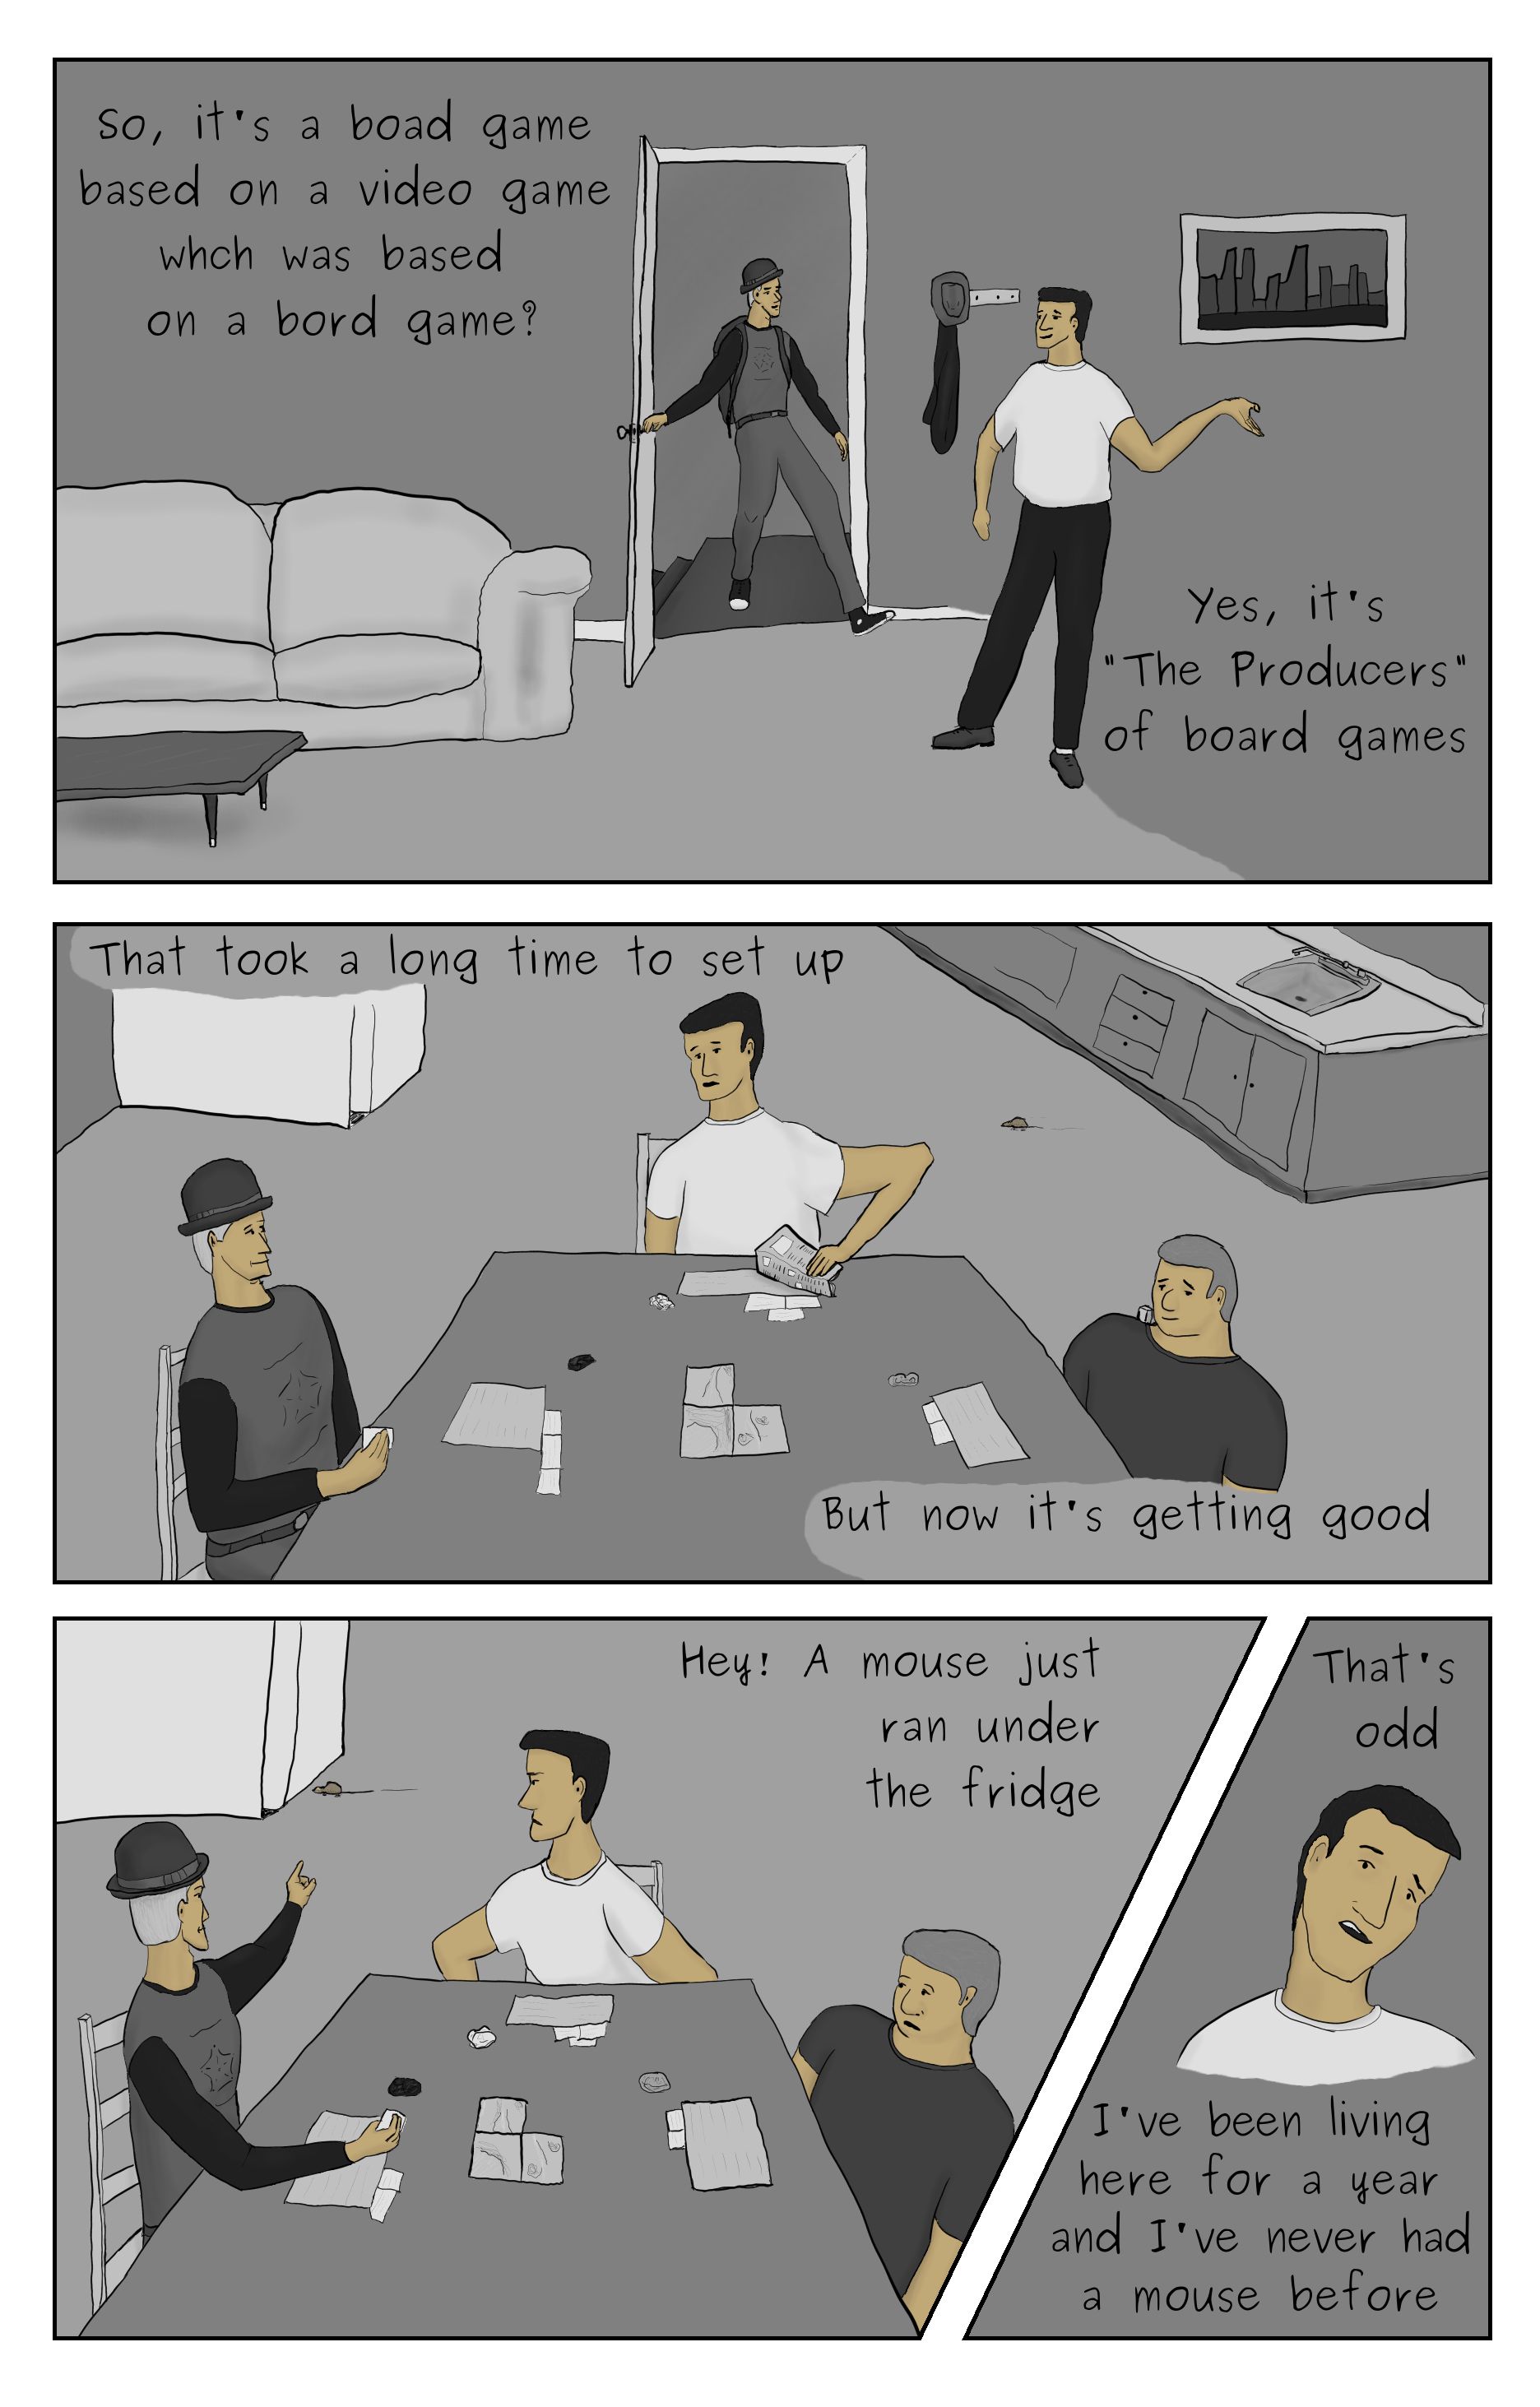 A comic featuring Phillip Gerba coming over to a friends house to play a board game, and a mouse running under the fridge while the game was being played.